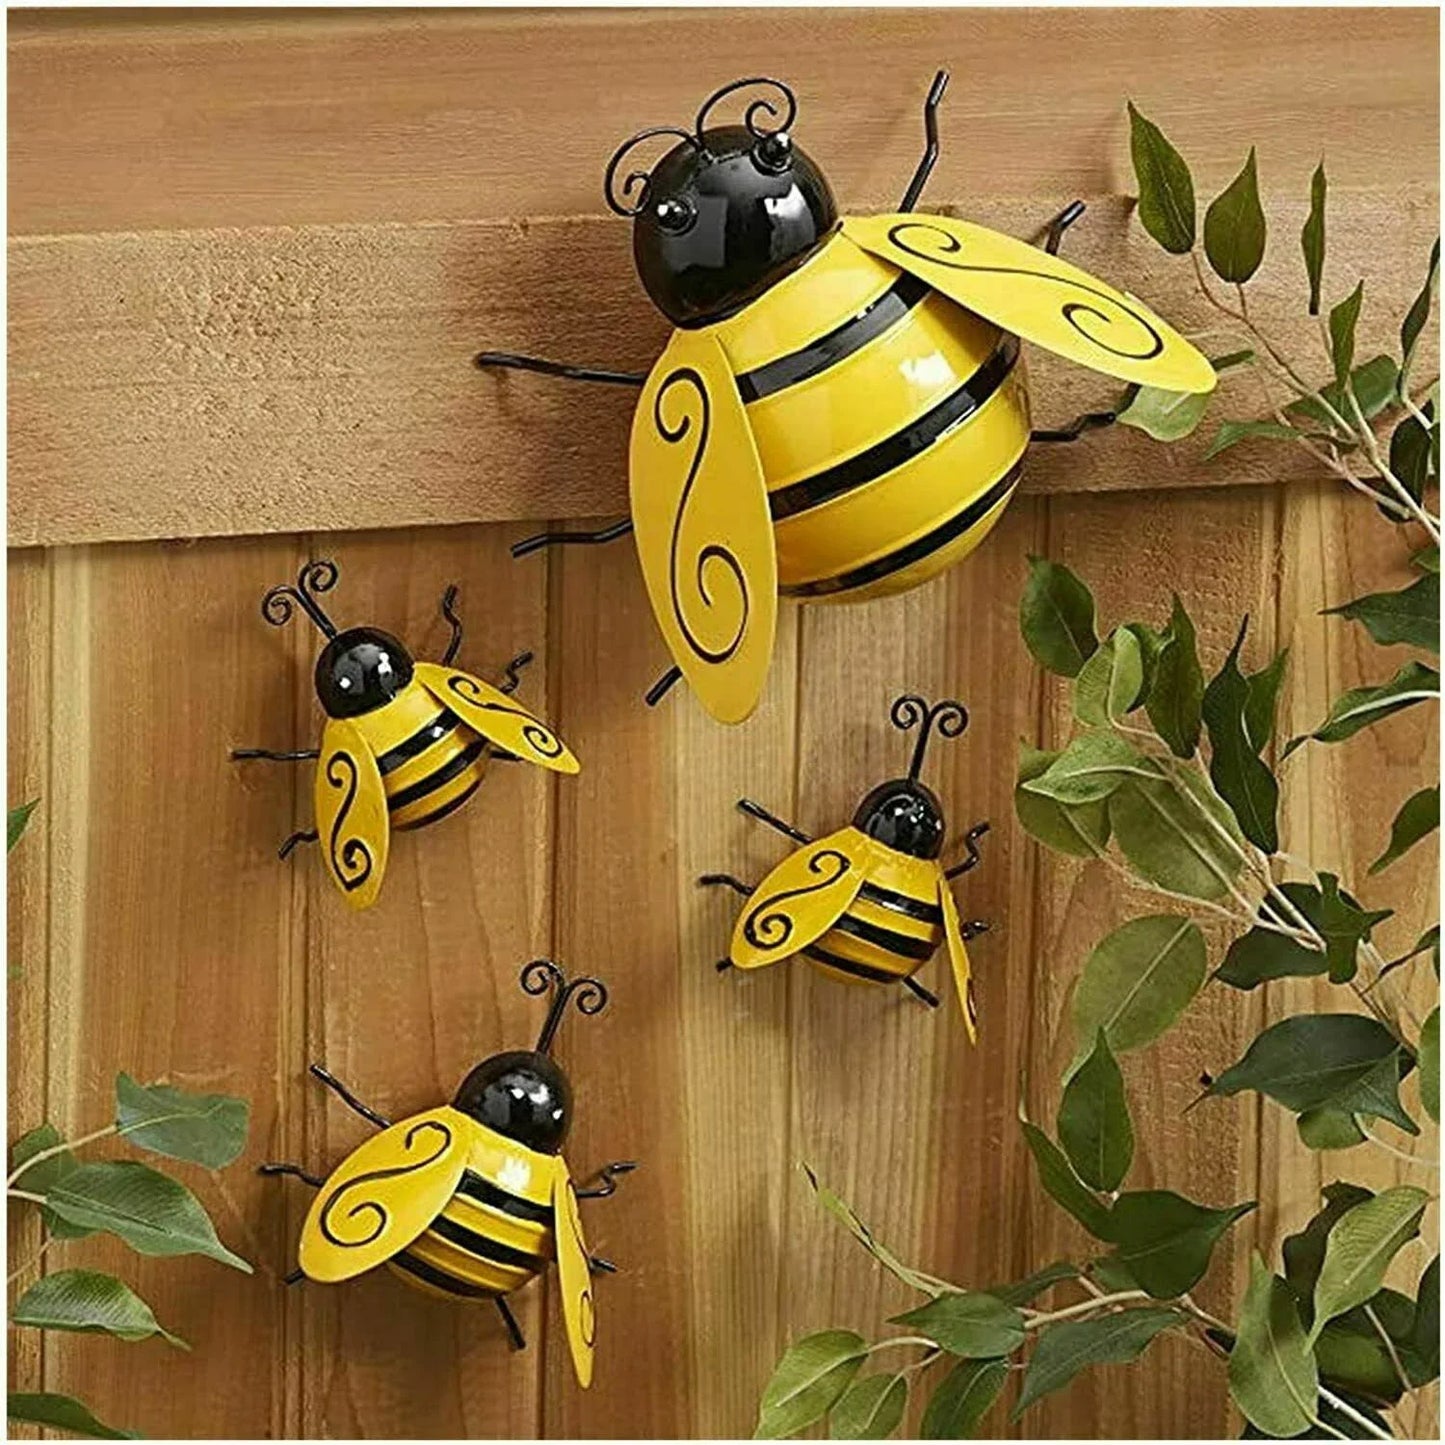 1/4pcs set Decorative Metal Bee Figurines Art Home Decoration Bee Backyard Garden Accent Wall Ornament Insects Miniatures